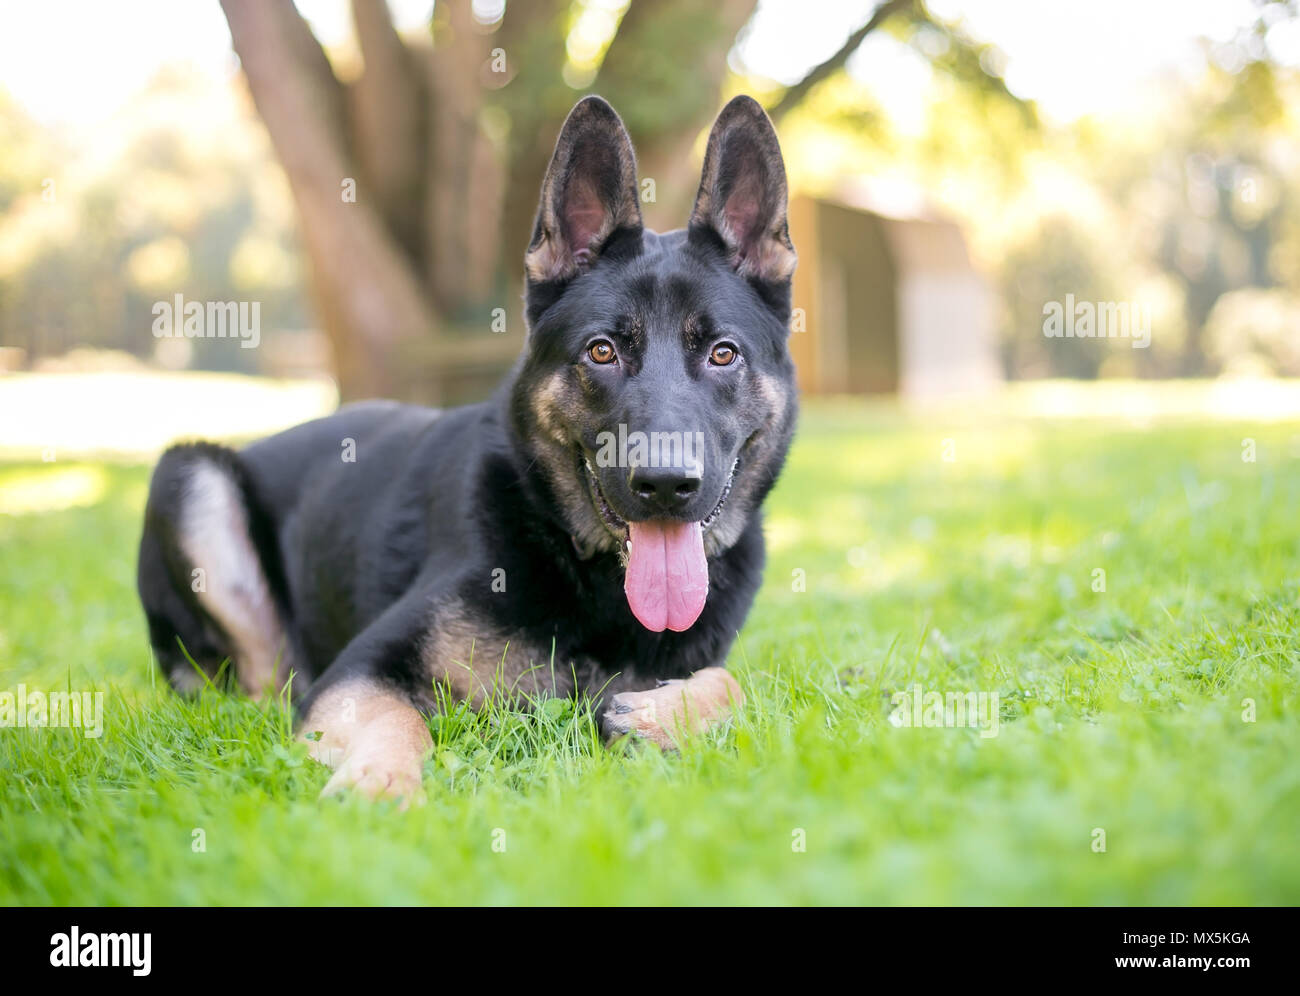 A purebred black and tan German Shepherd dog relaxing in the grass Stock Photo